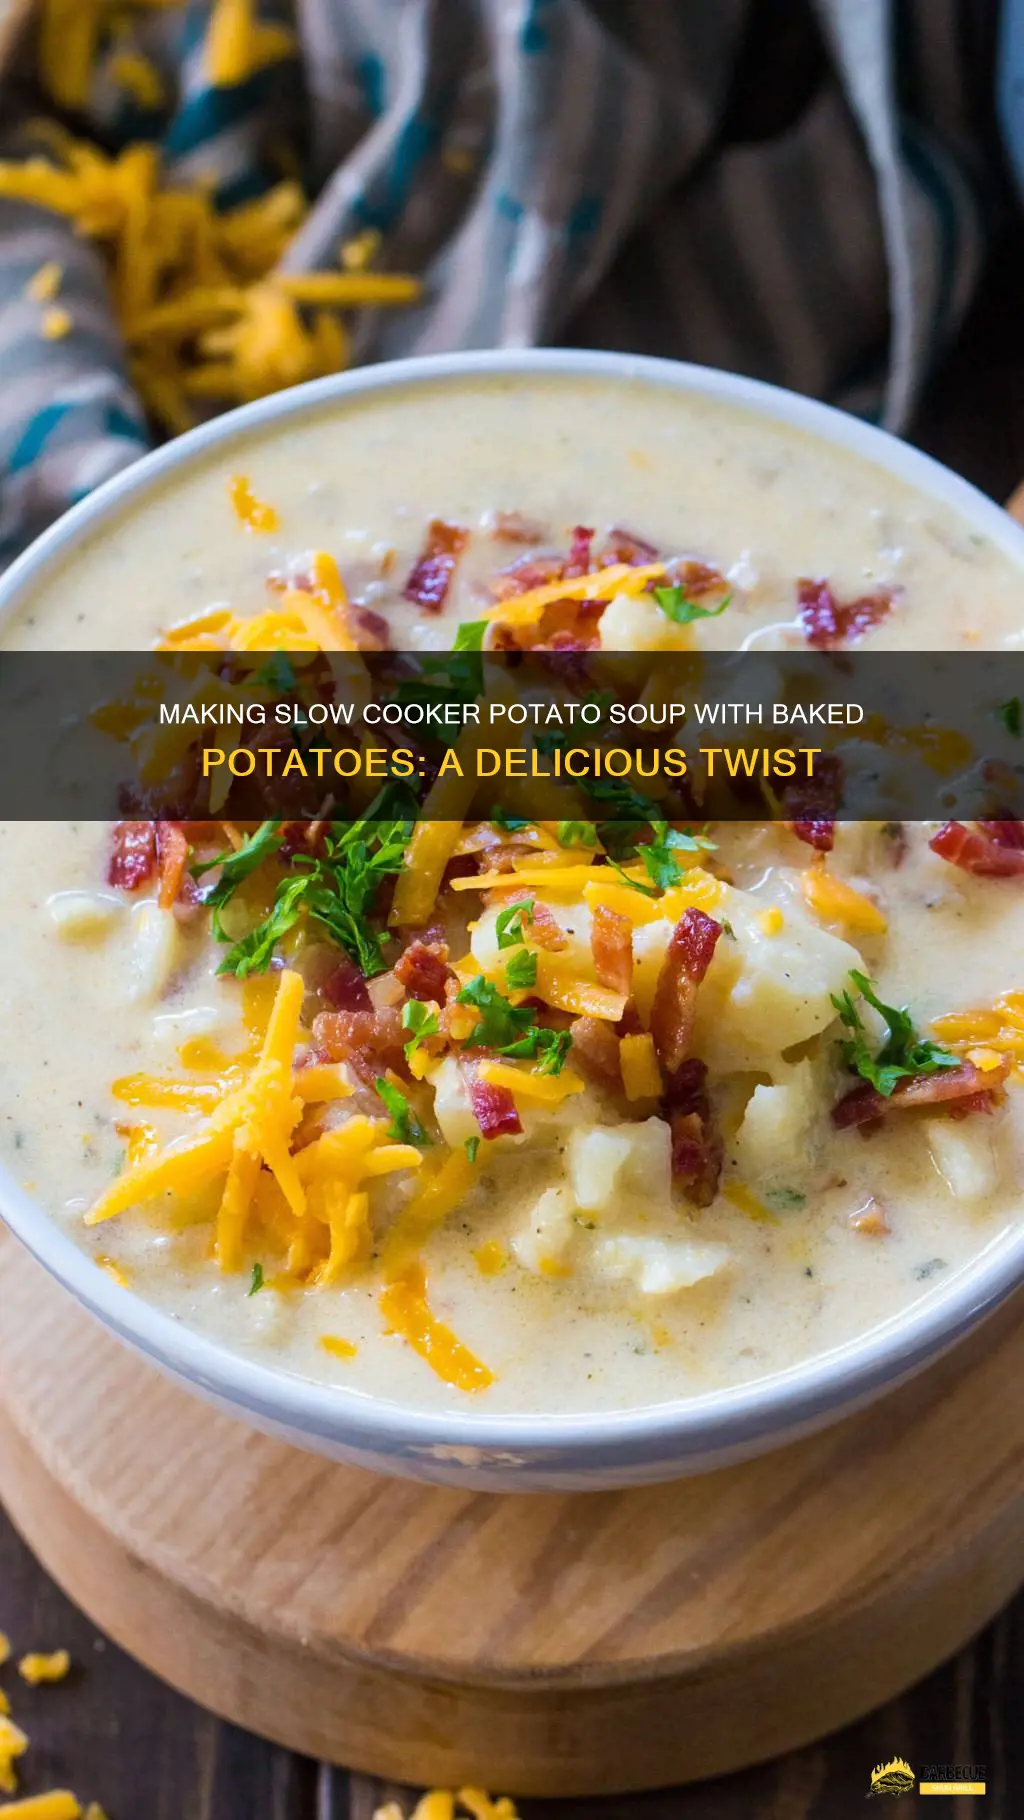 Making Slow Cooker Potato Soup With Baked Potatoes: A Delicious Twist ...